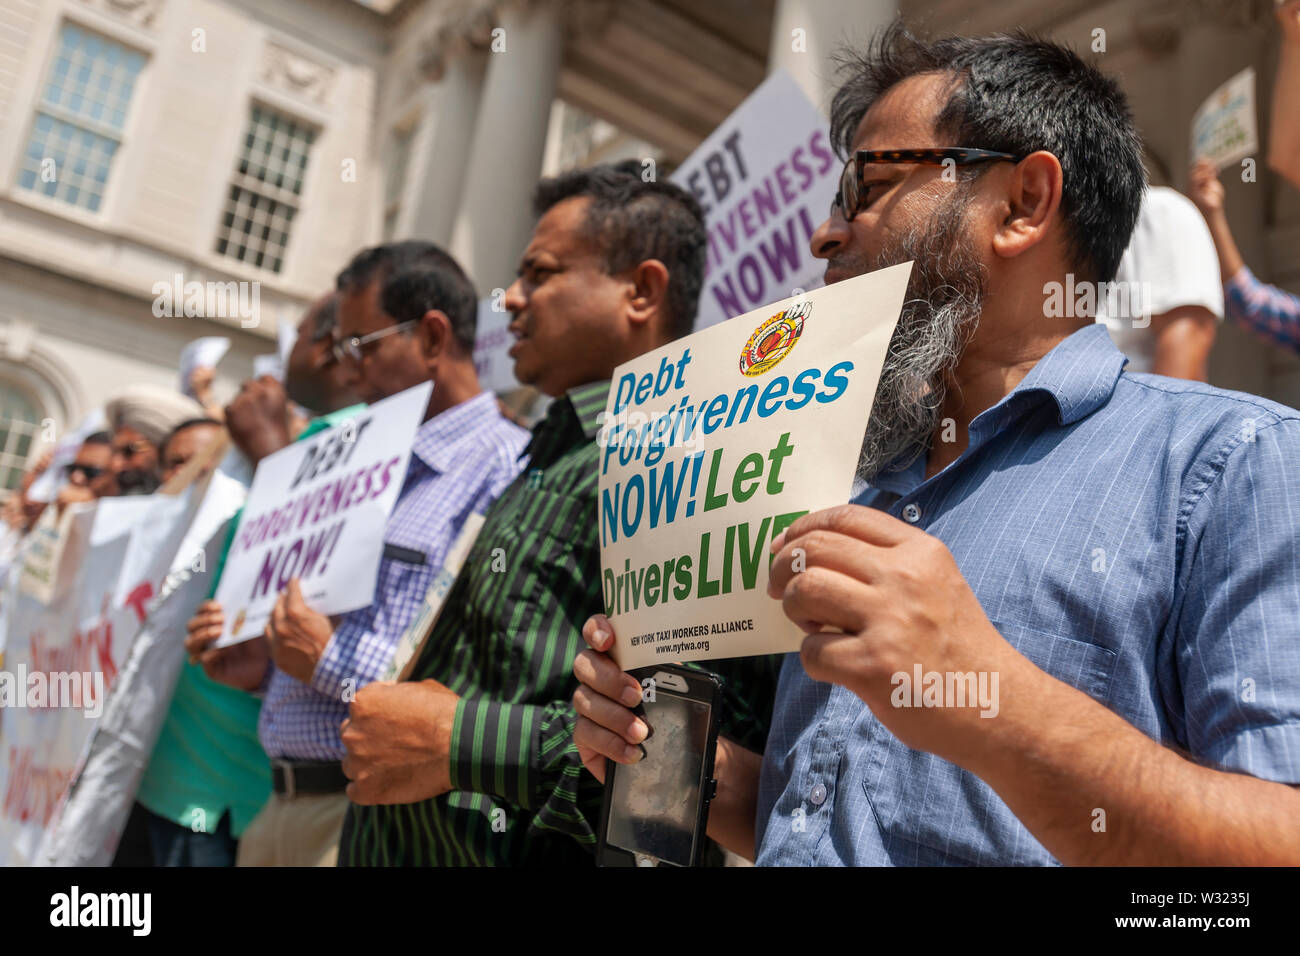 New York taxi drivers and their supporters rally on the steps of NY City Hall in Thursday, July 11, 2019 for a news conference calling for debt forgiveness for their medallion loans. Medallion brokers allegedly took advantage of drivers who bought medallions at artificially inflated prices and ended up burdened with debt. A number of drivers have filed for bankruptcy or are considering it and there have been a few suicides amongst stressed drivers. (© Richard B. Levine) Stock Photo